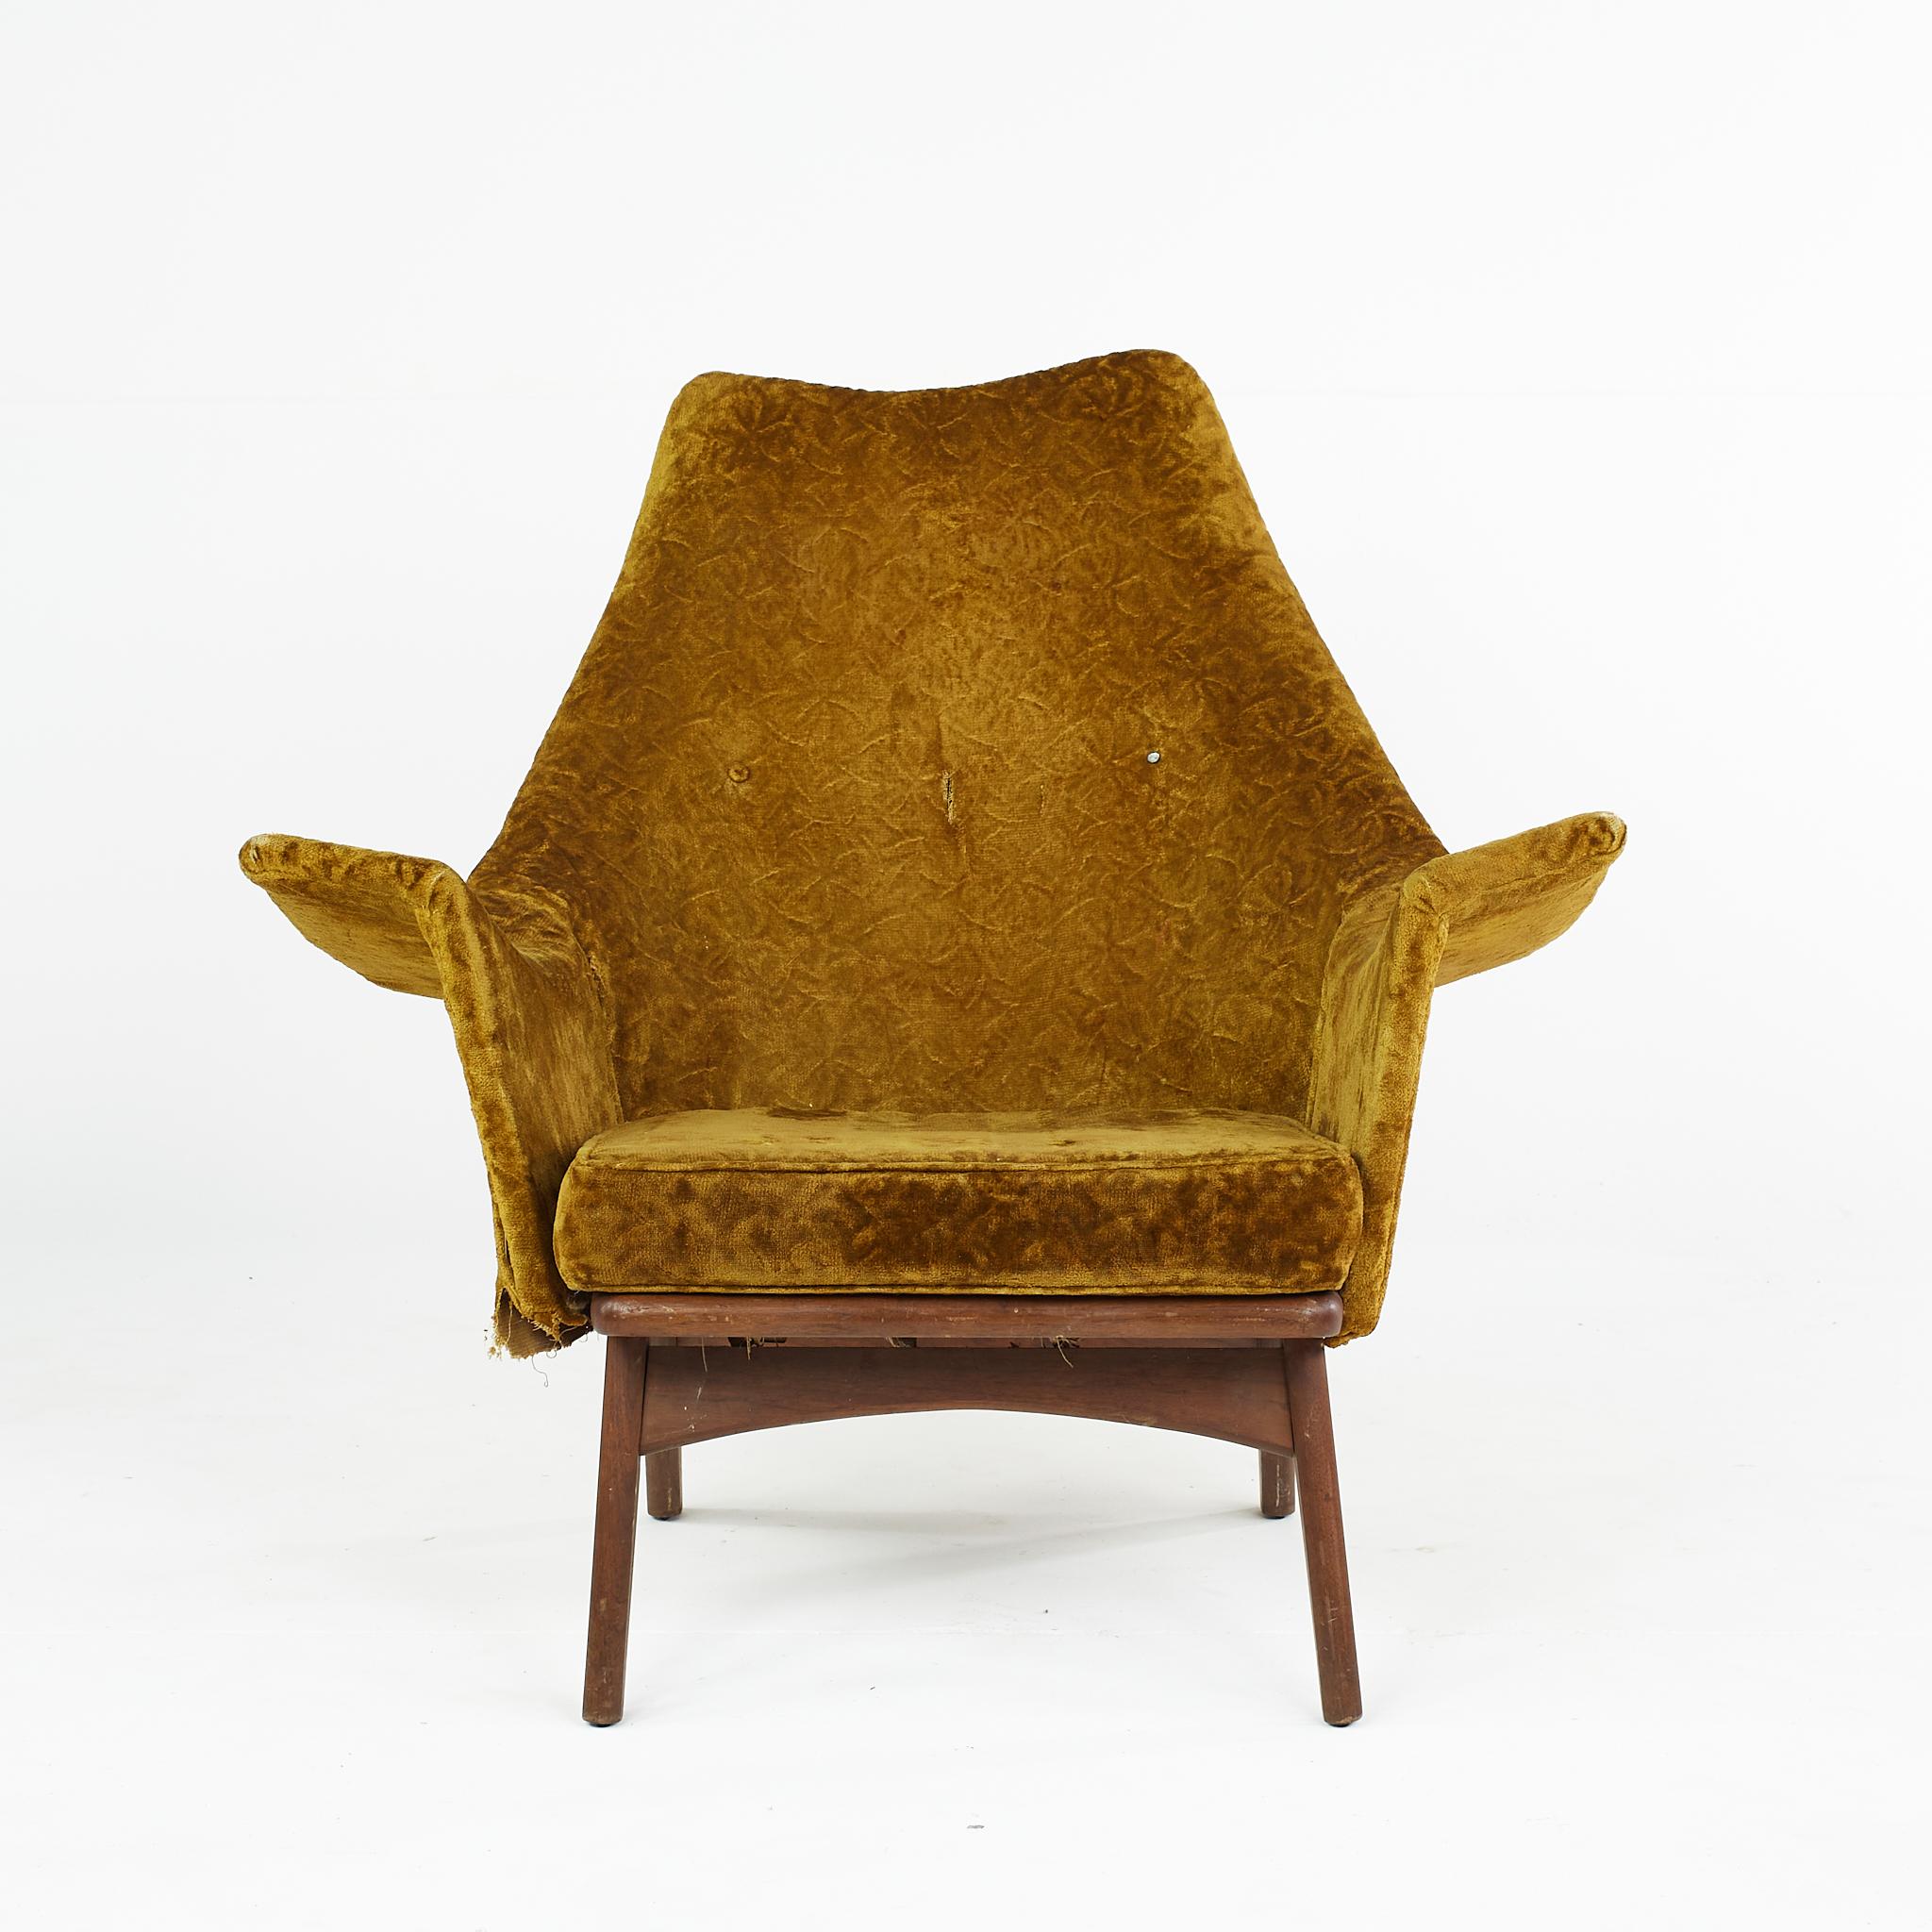 Adrian Pearsall mid century walnut wingback arm chair

This chair measures: 38 wide x 44 deep x 39 inches high, with a seat height of 16 and an arm height of 26 inches

Ready for new upholstery. This service is available for an additional